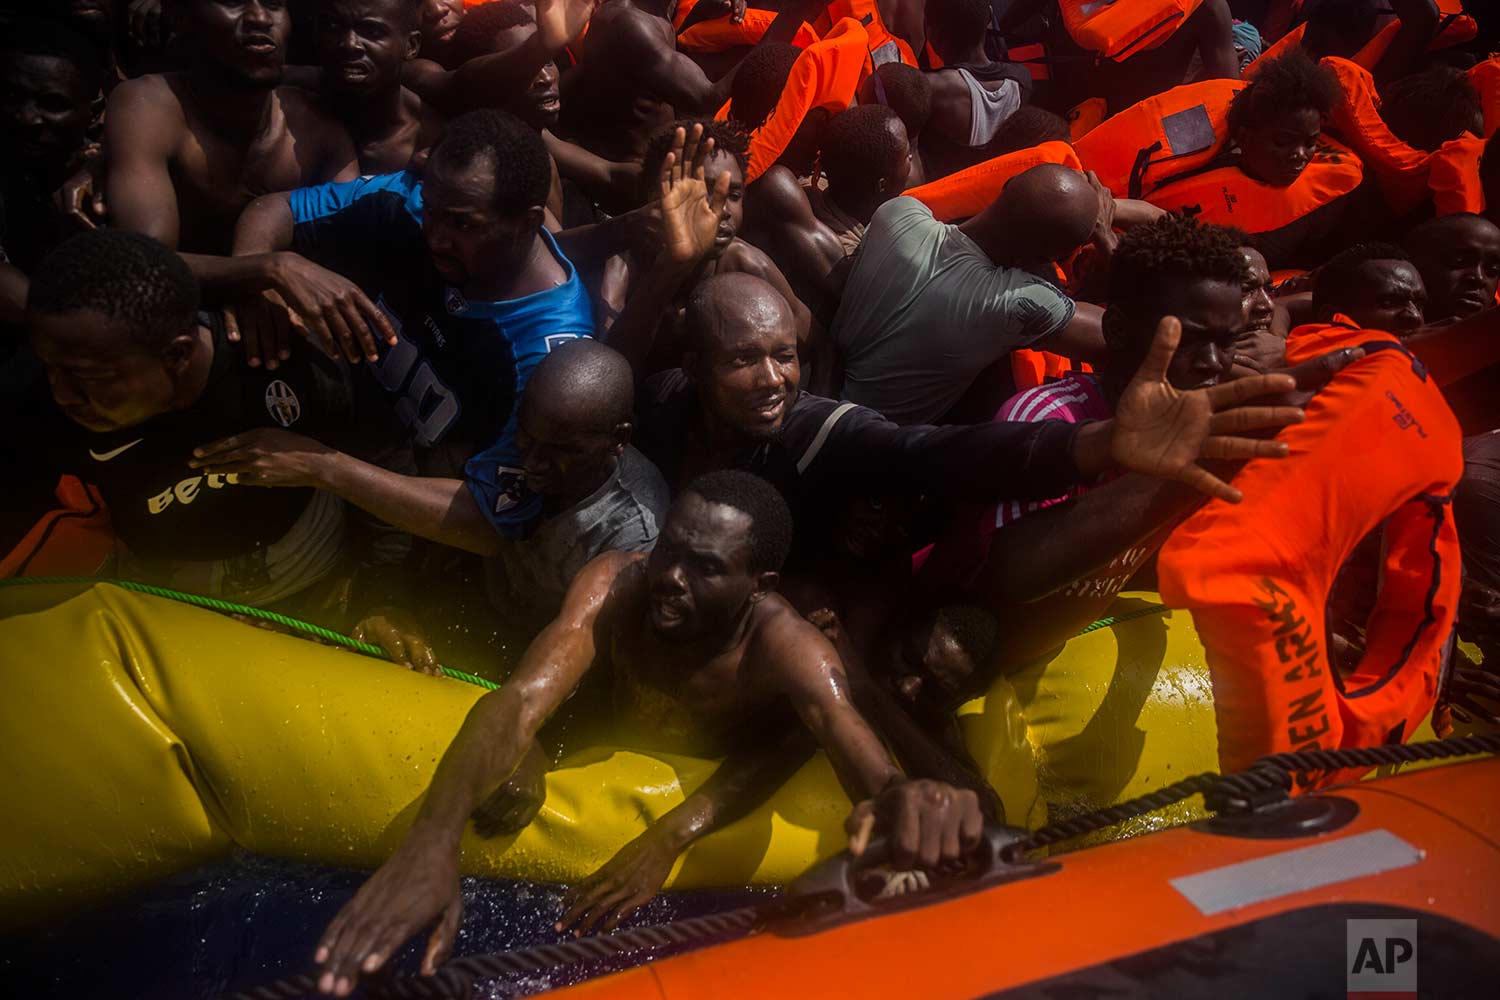  In this Tuesday, July 25, 2017 photo, sub-Saharan migrants receive life jackets as they are rescued by aid workers of Spanish NGO Proactiva Open Arms in the Mediterranean Sea, about 15 miles north of Sabratha, Libya. (AP Photo/Santi Palacios)
 